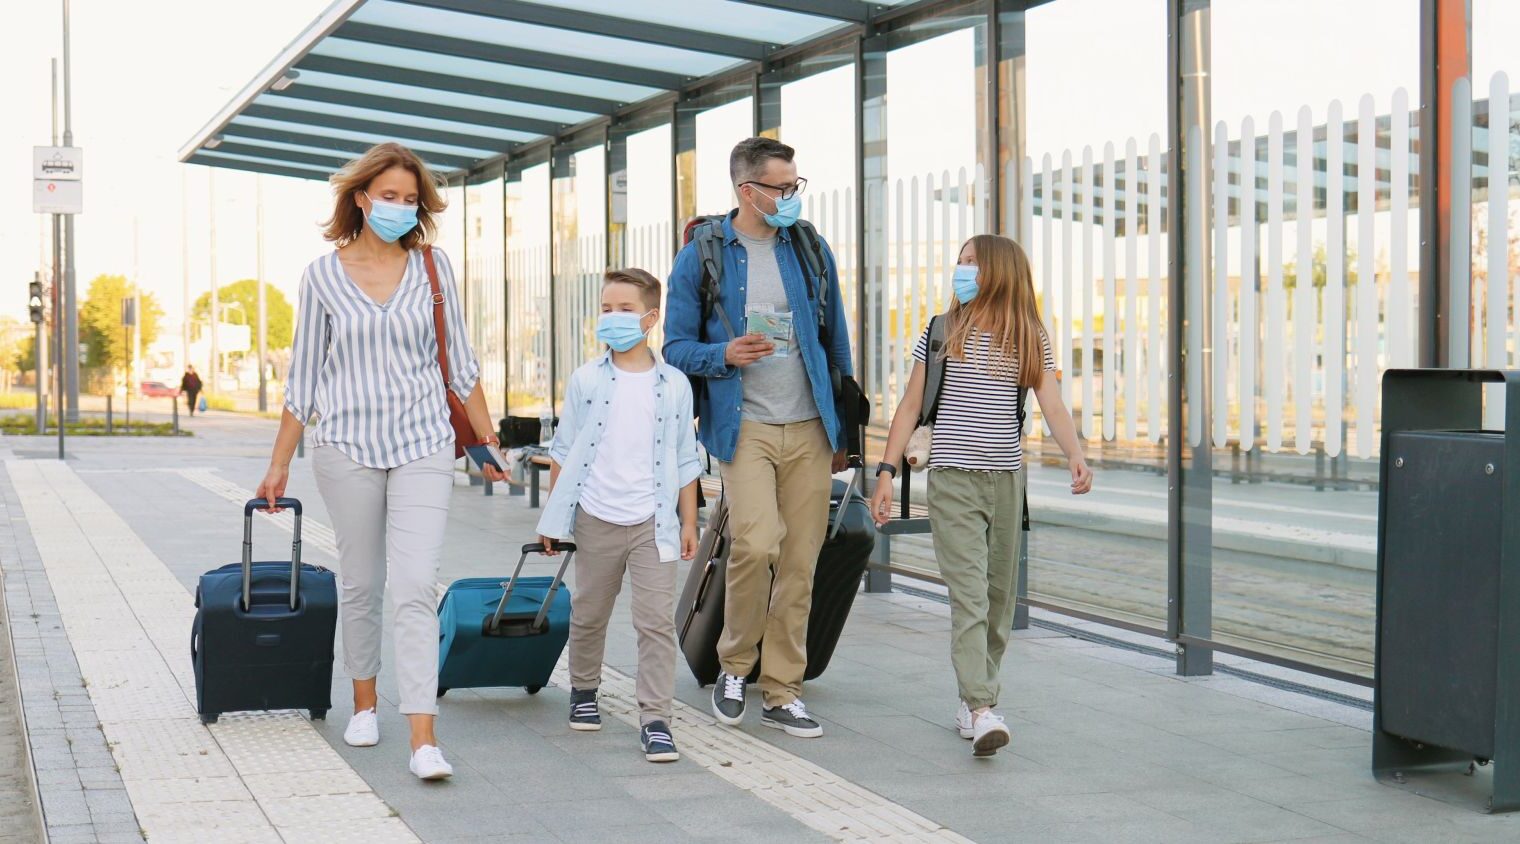 Safer air travel could be back on the cards thanks to SpectraLIT’s rapid Covid test. Photo by Shutterstock